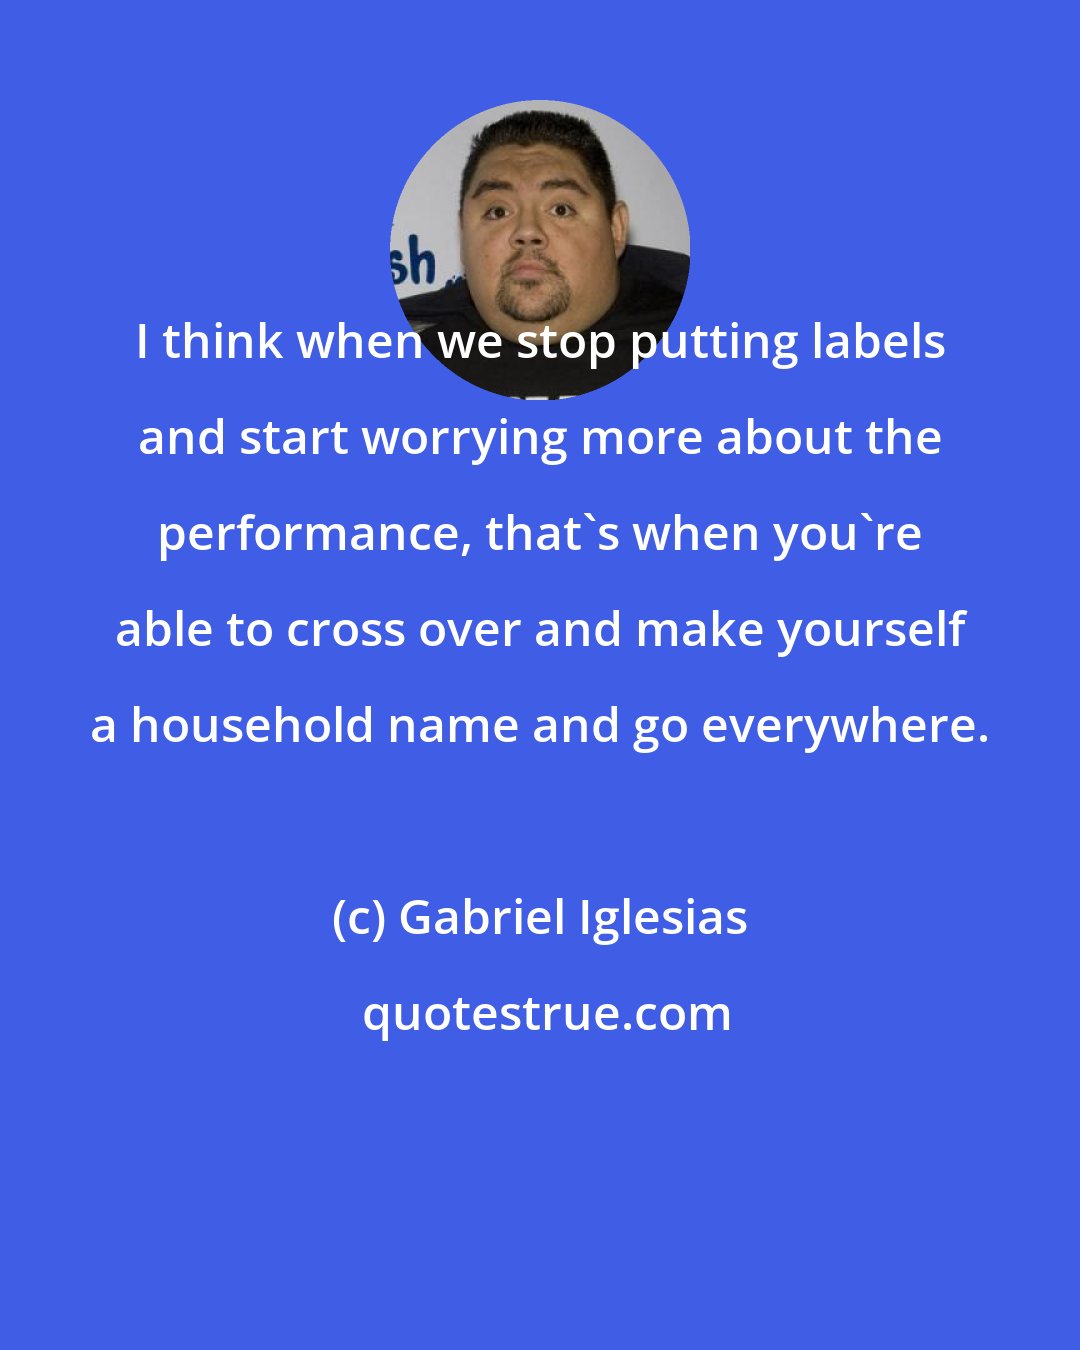 Gabriel Iglesias: I think when we stop putting labels and start worrying more about the performance, that's when you're able to cross over and make yourself a household name and go everywhere.